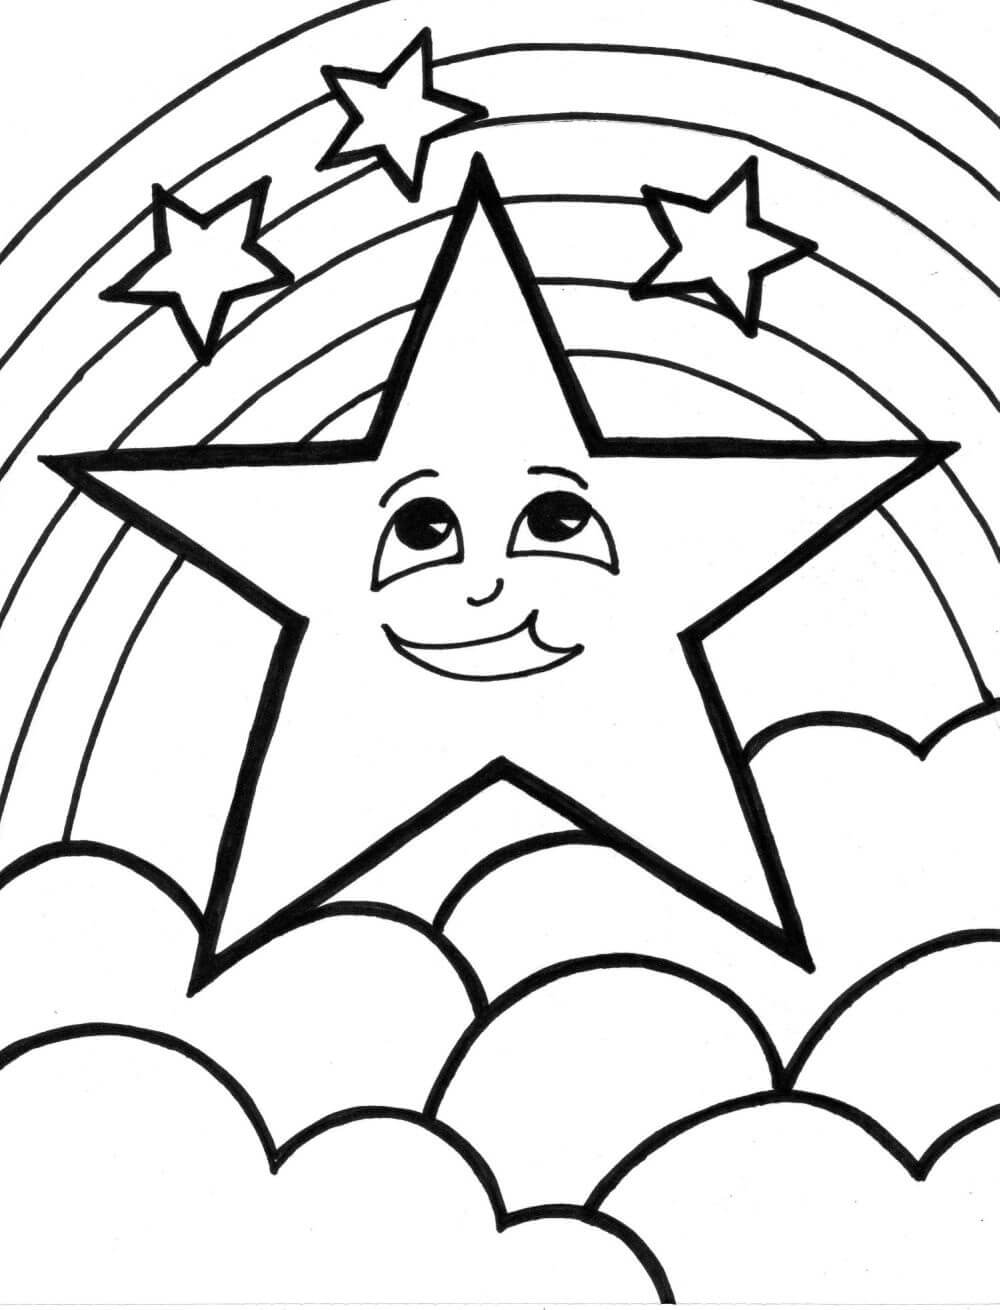 Stars and Rainbow coloring page